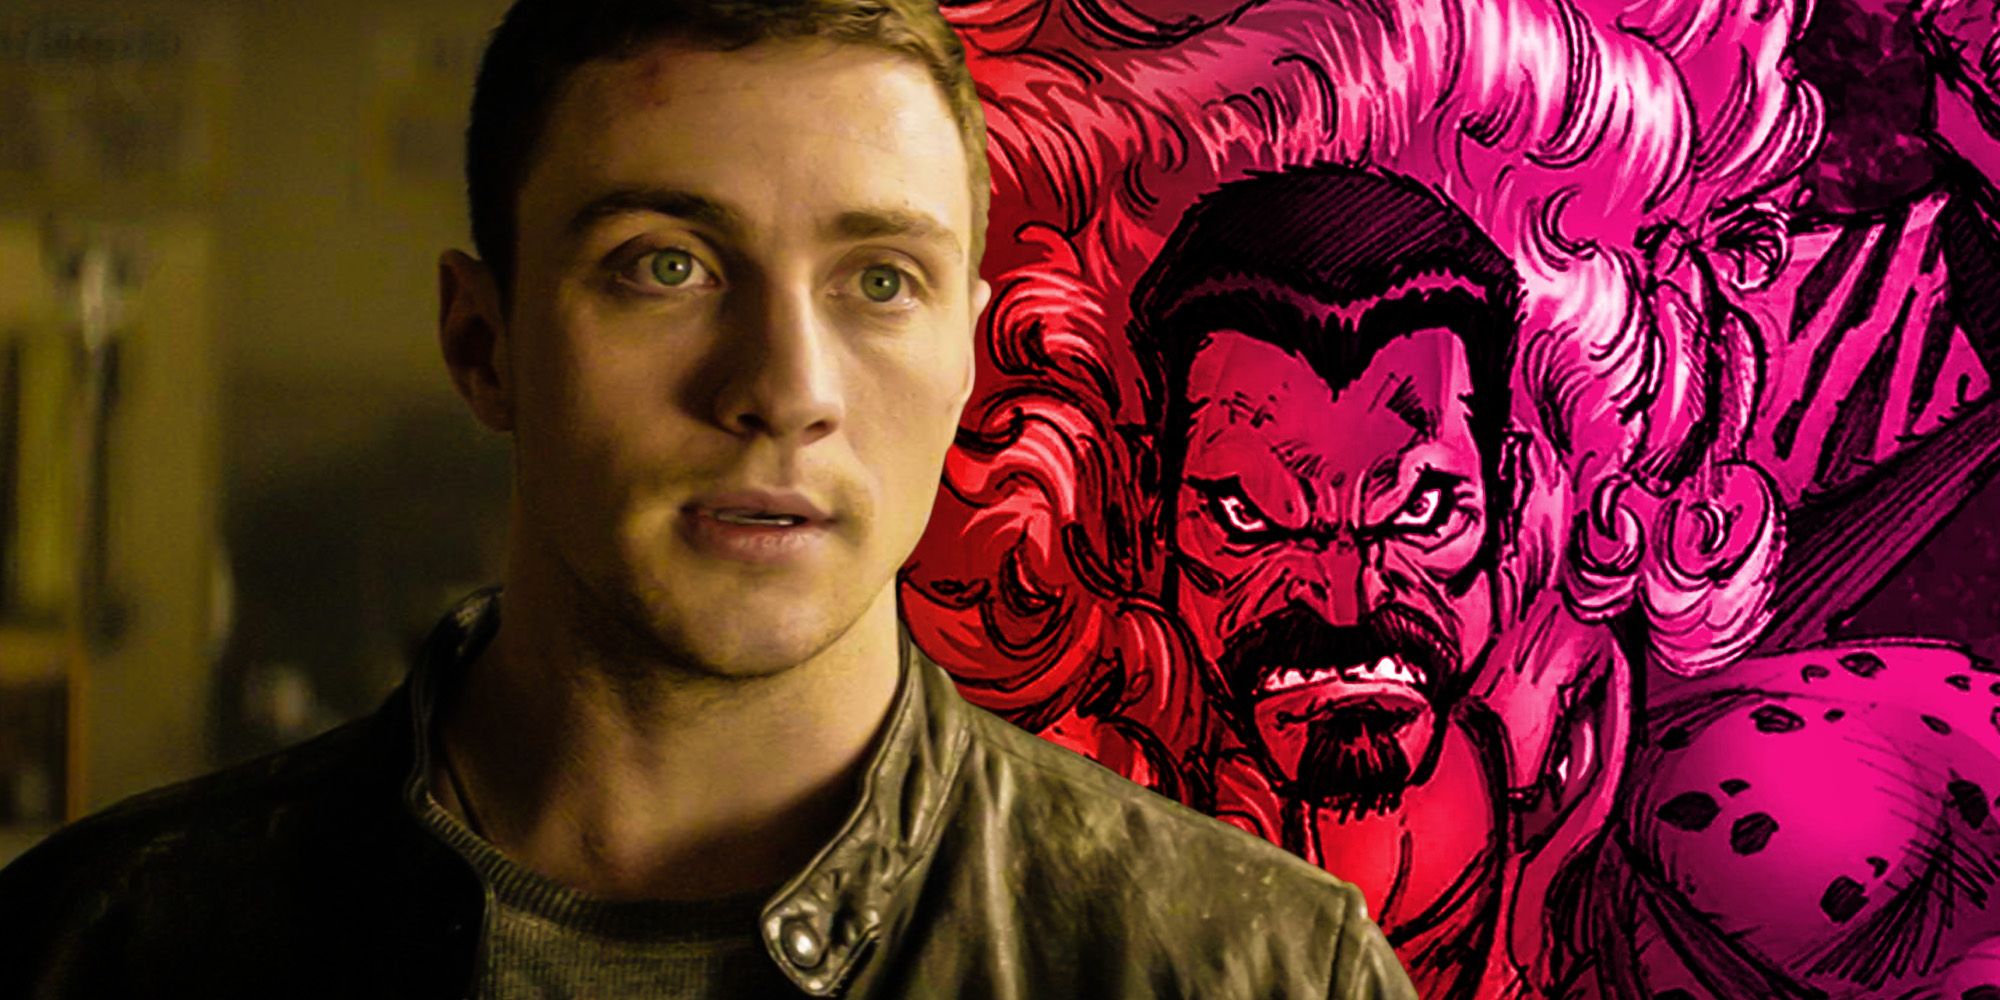 A blended image of actor Aaron Taylor Johnson and the Marvel comic character Kraven the hunter